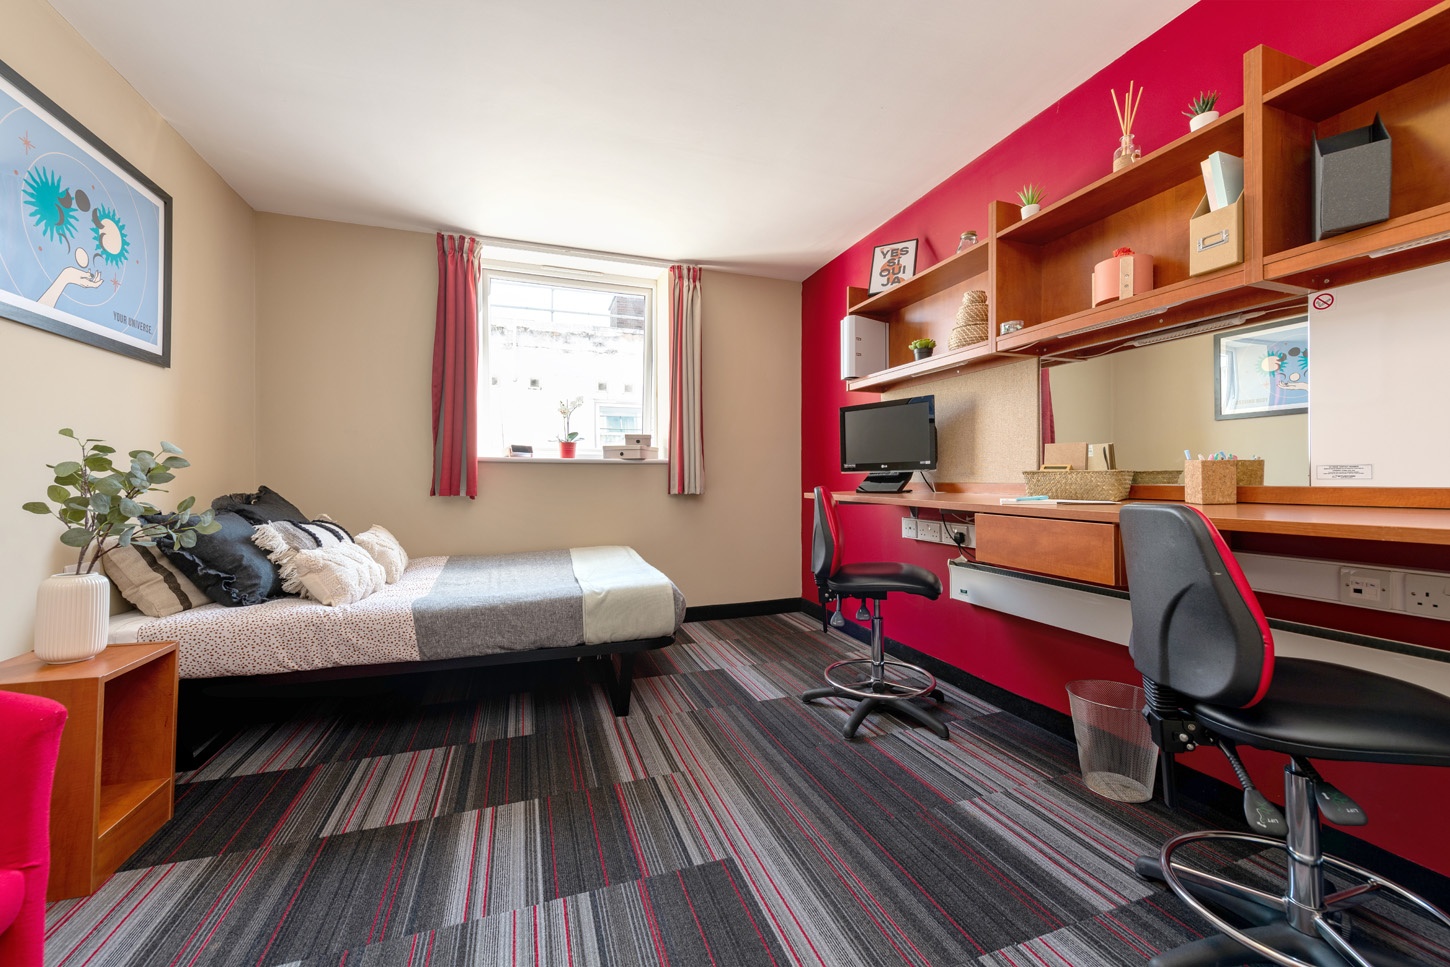 market way student accommodation coventry double deluxe bedroom